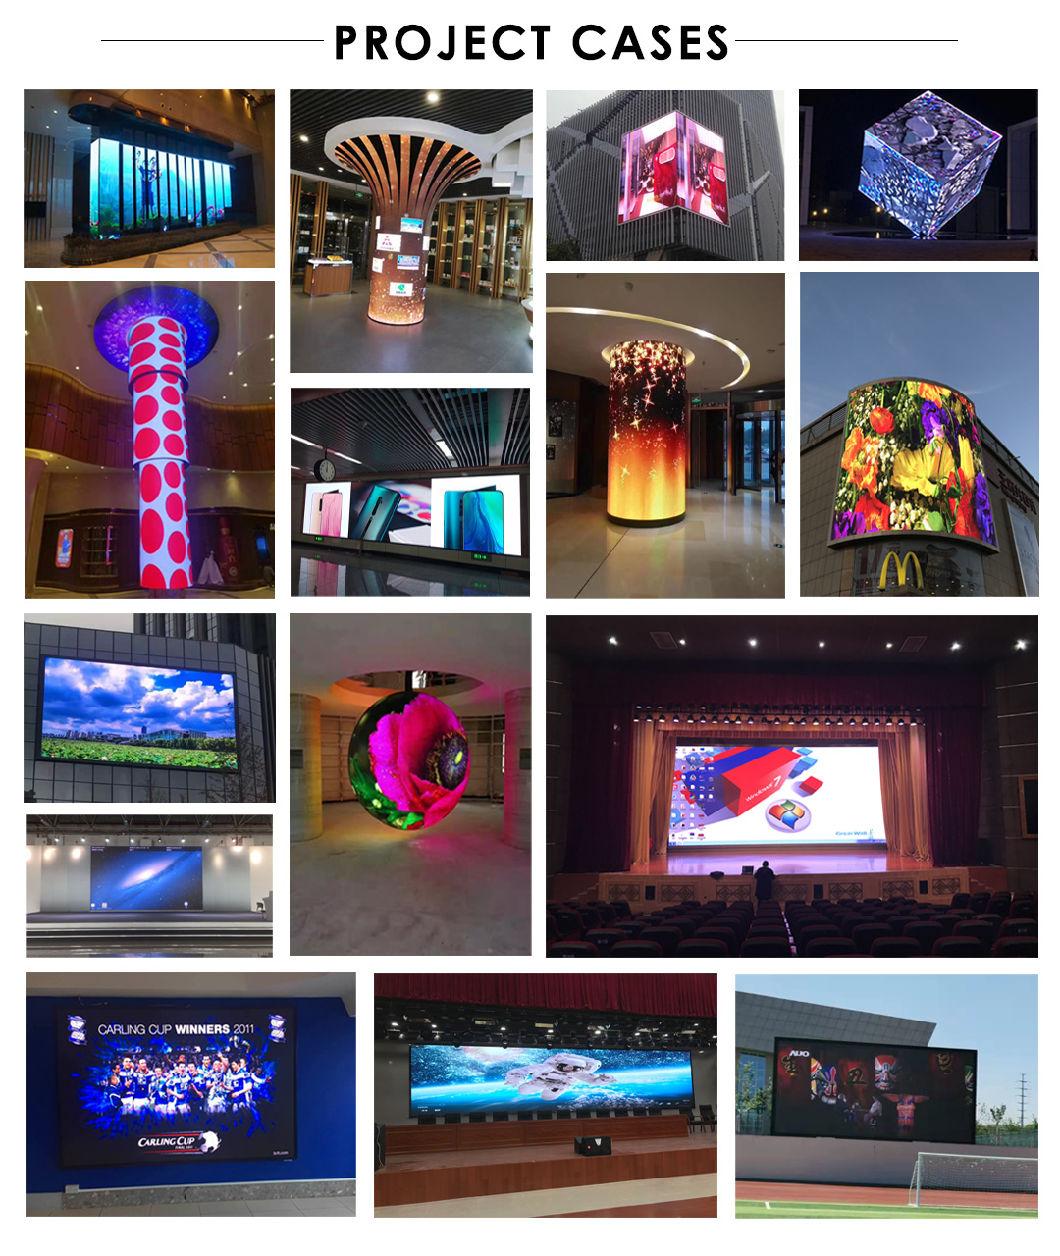 Indoor Small Pixel Pitch LED Definition Display Video Screen P1.86